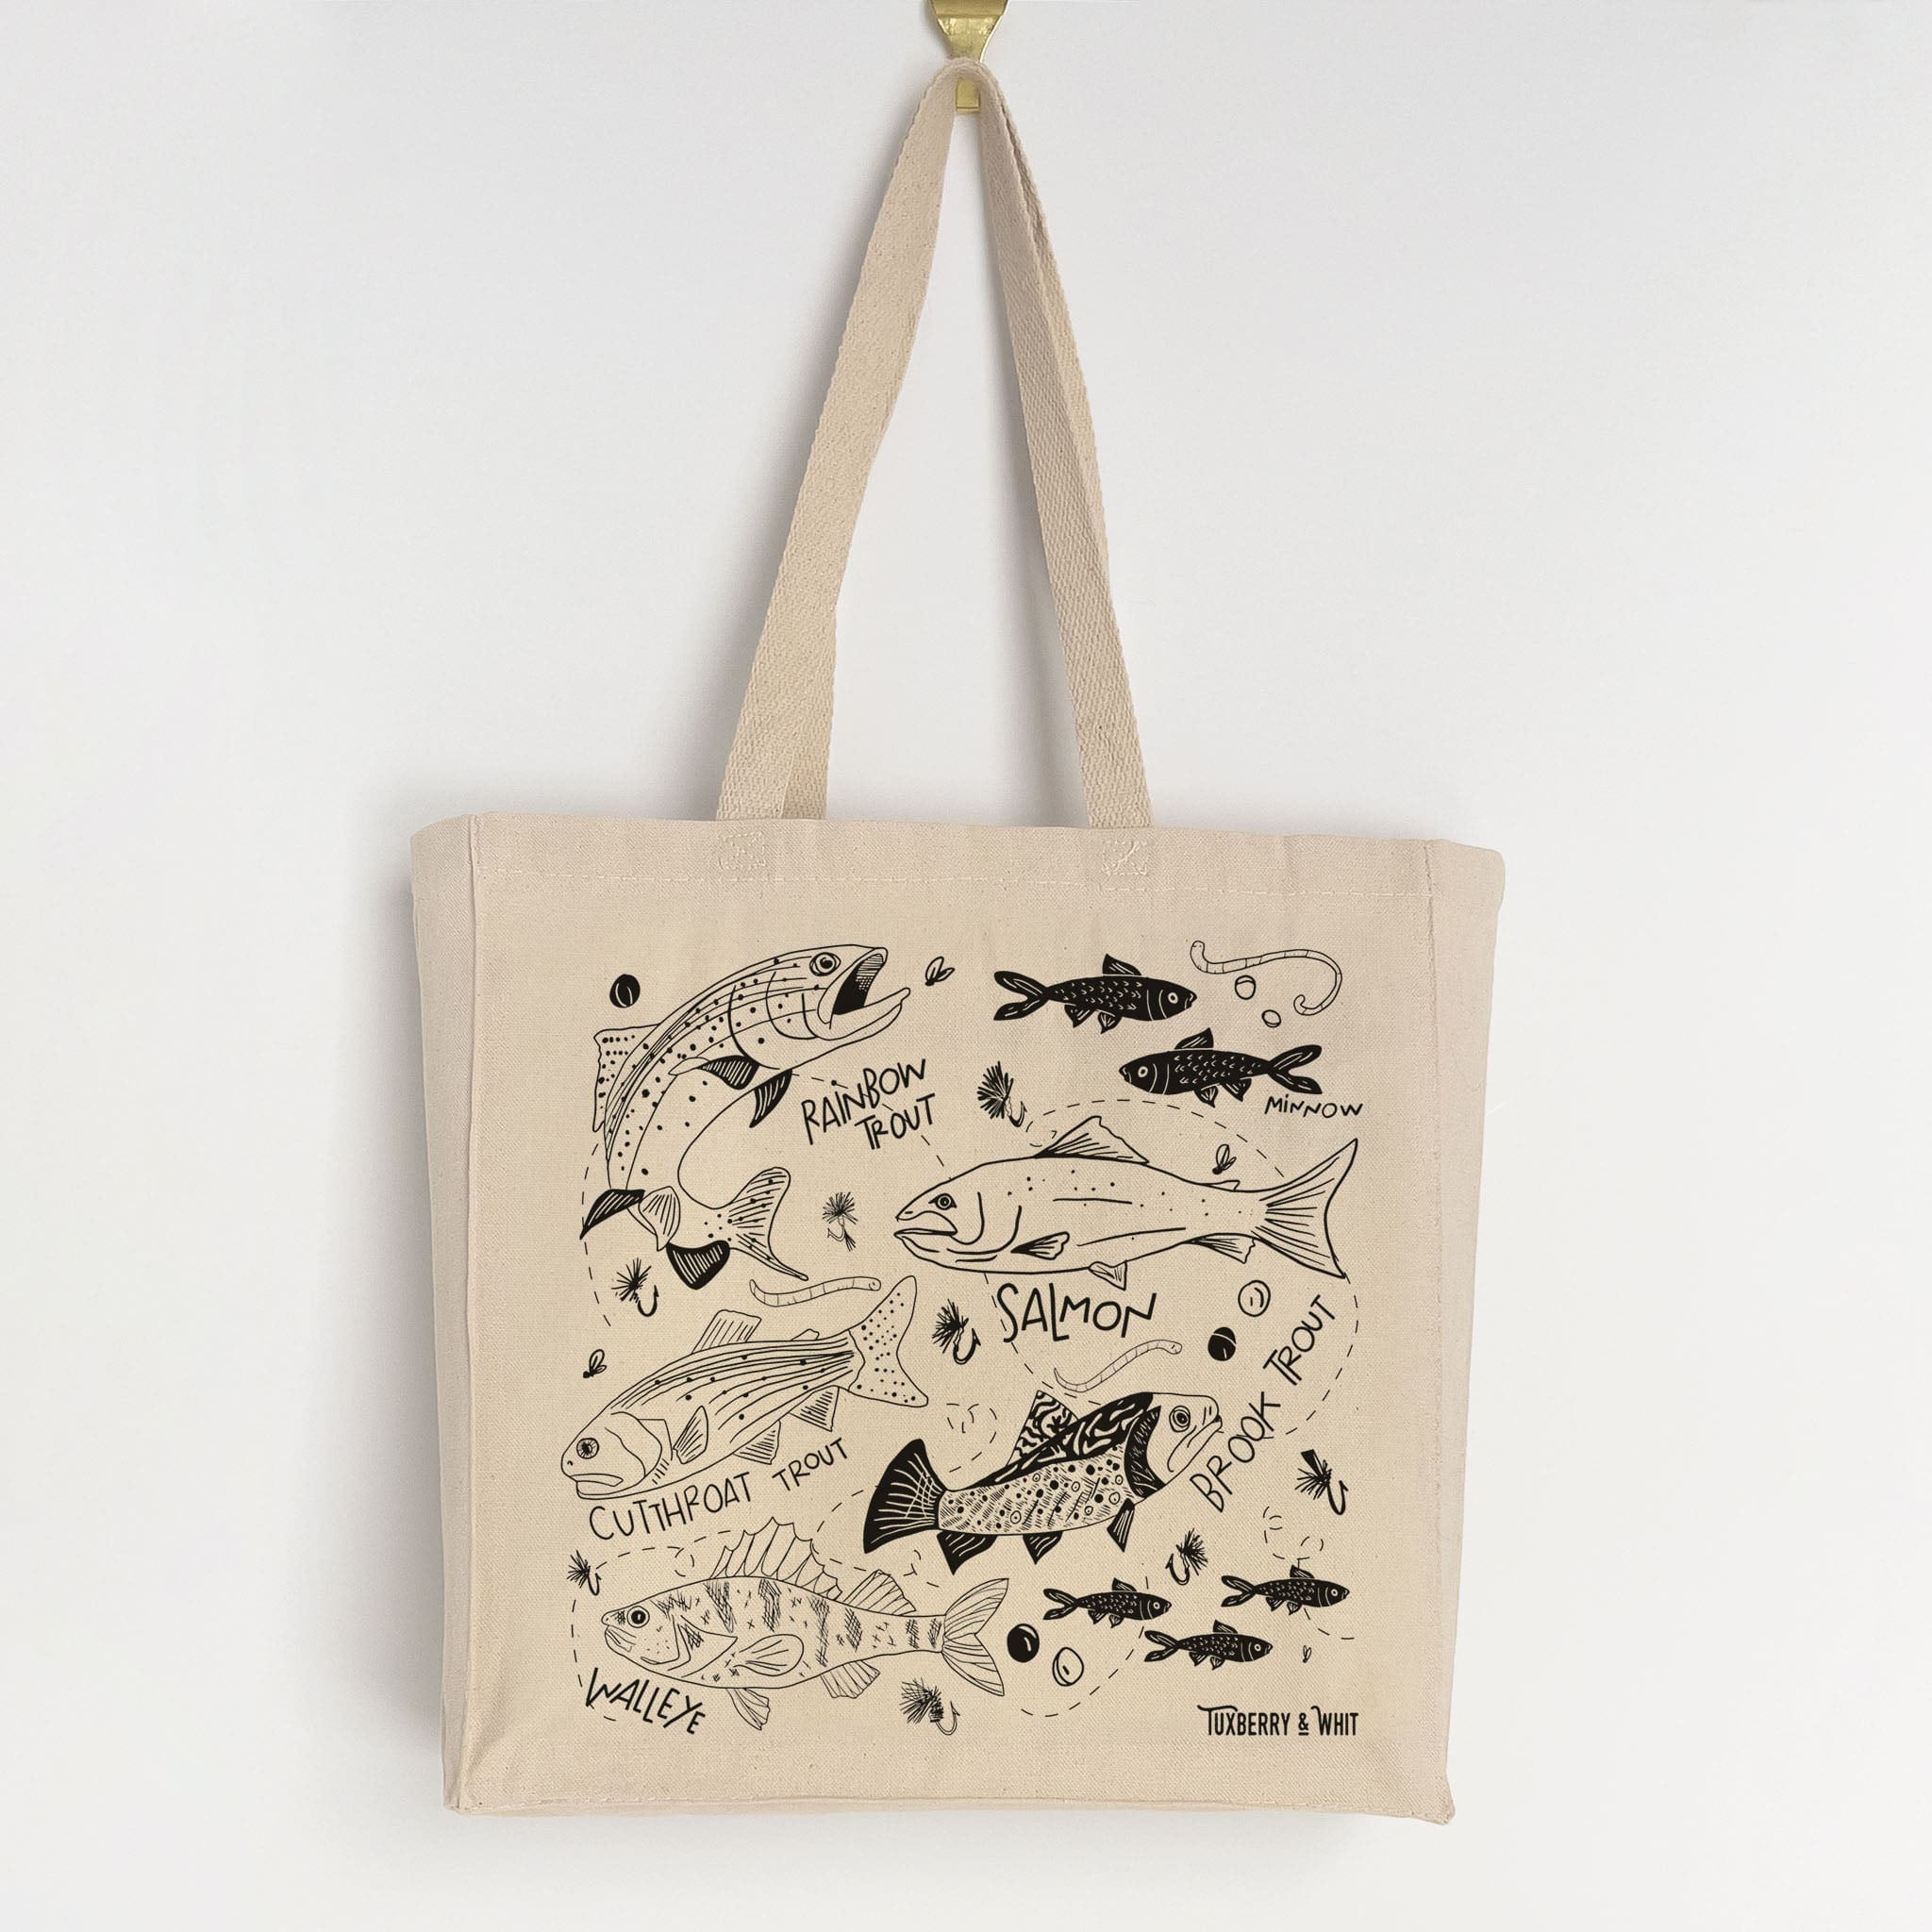 Hand Illustrated Fish Tote Bag  Reusable Eco-Friendly Shopping